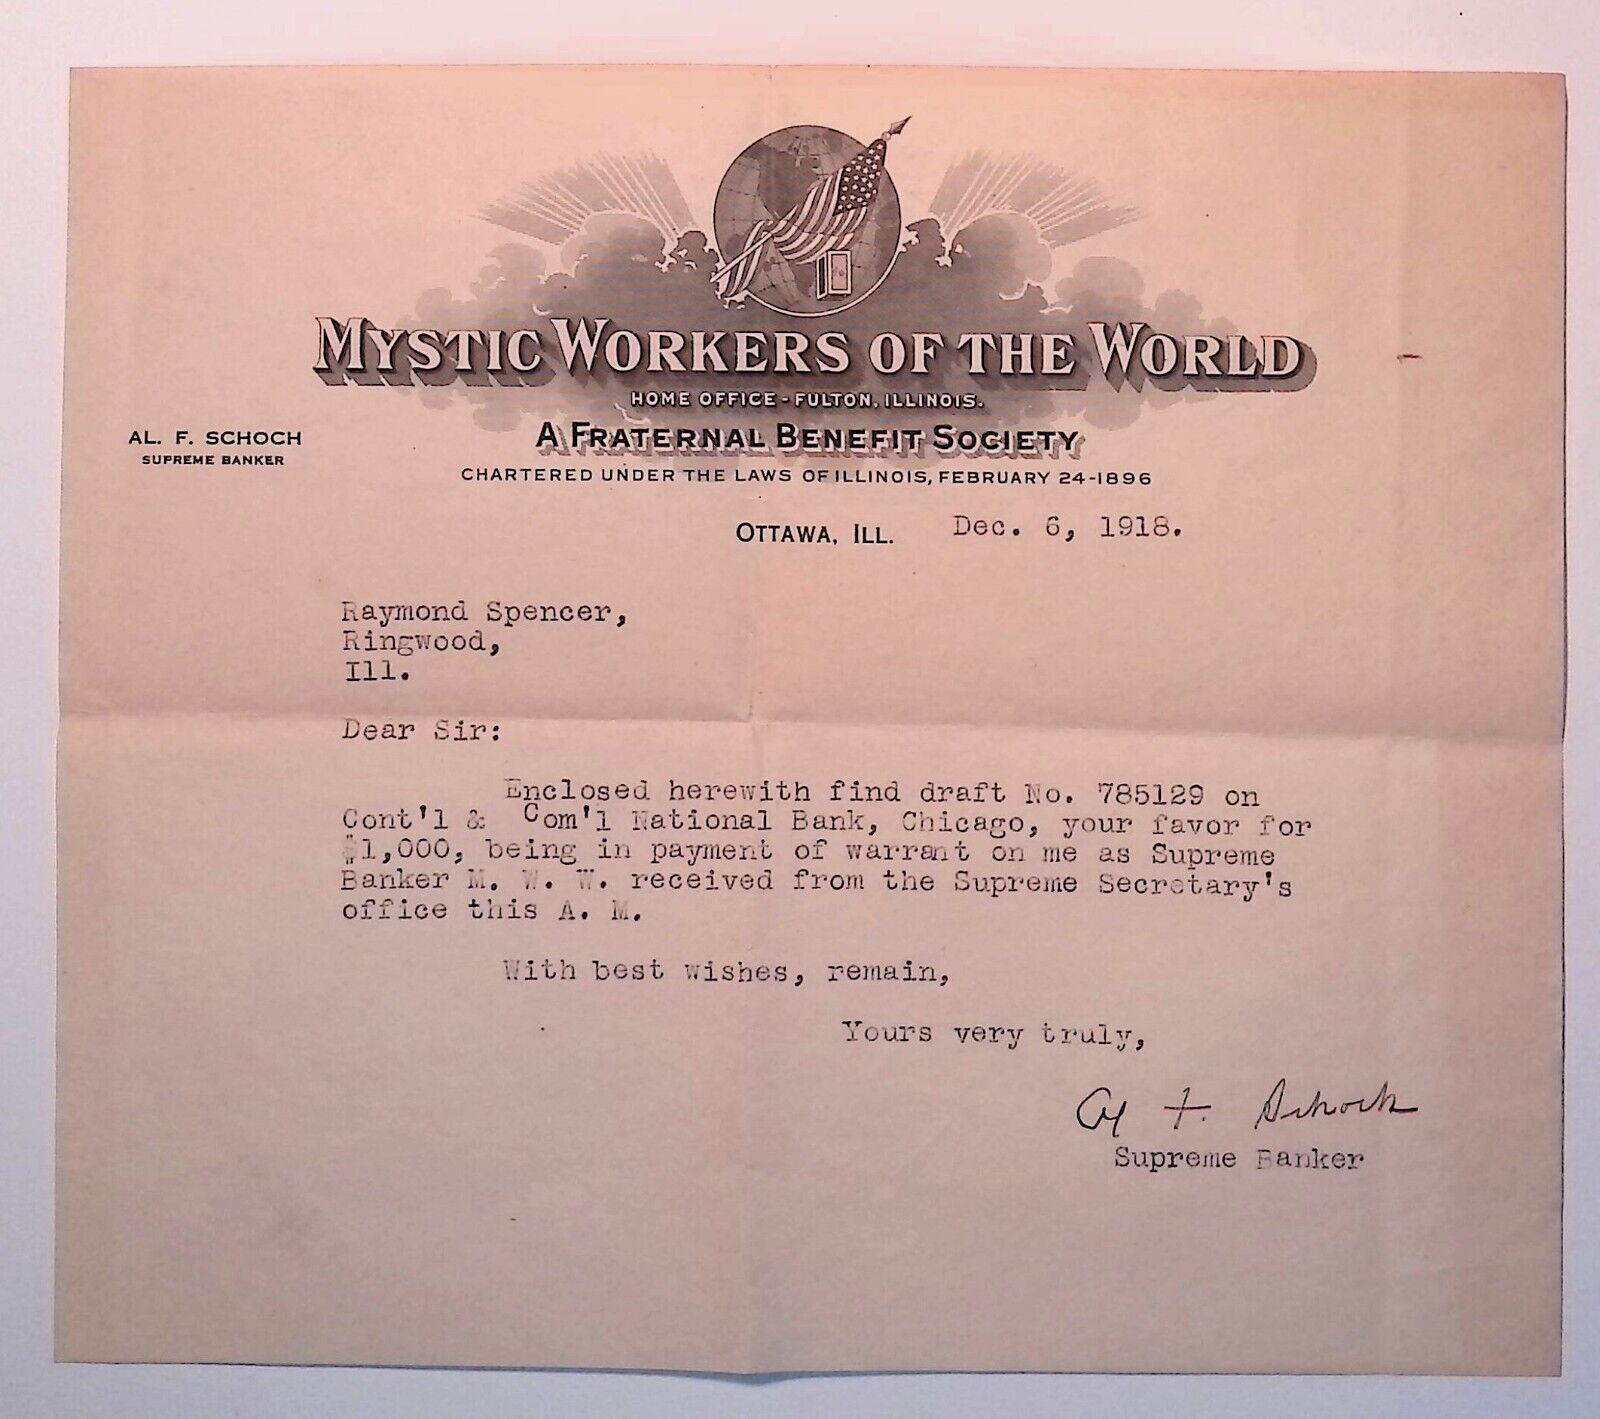 1918 Letter Mystic Workers of the World, Ottawa Illinois A Schoch Supreme Banker